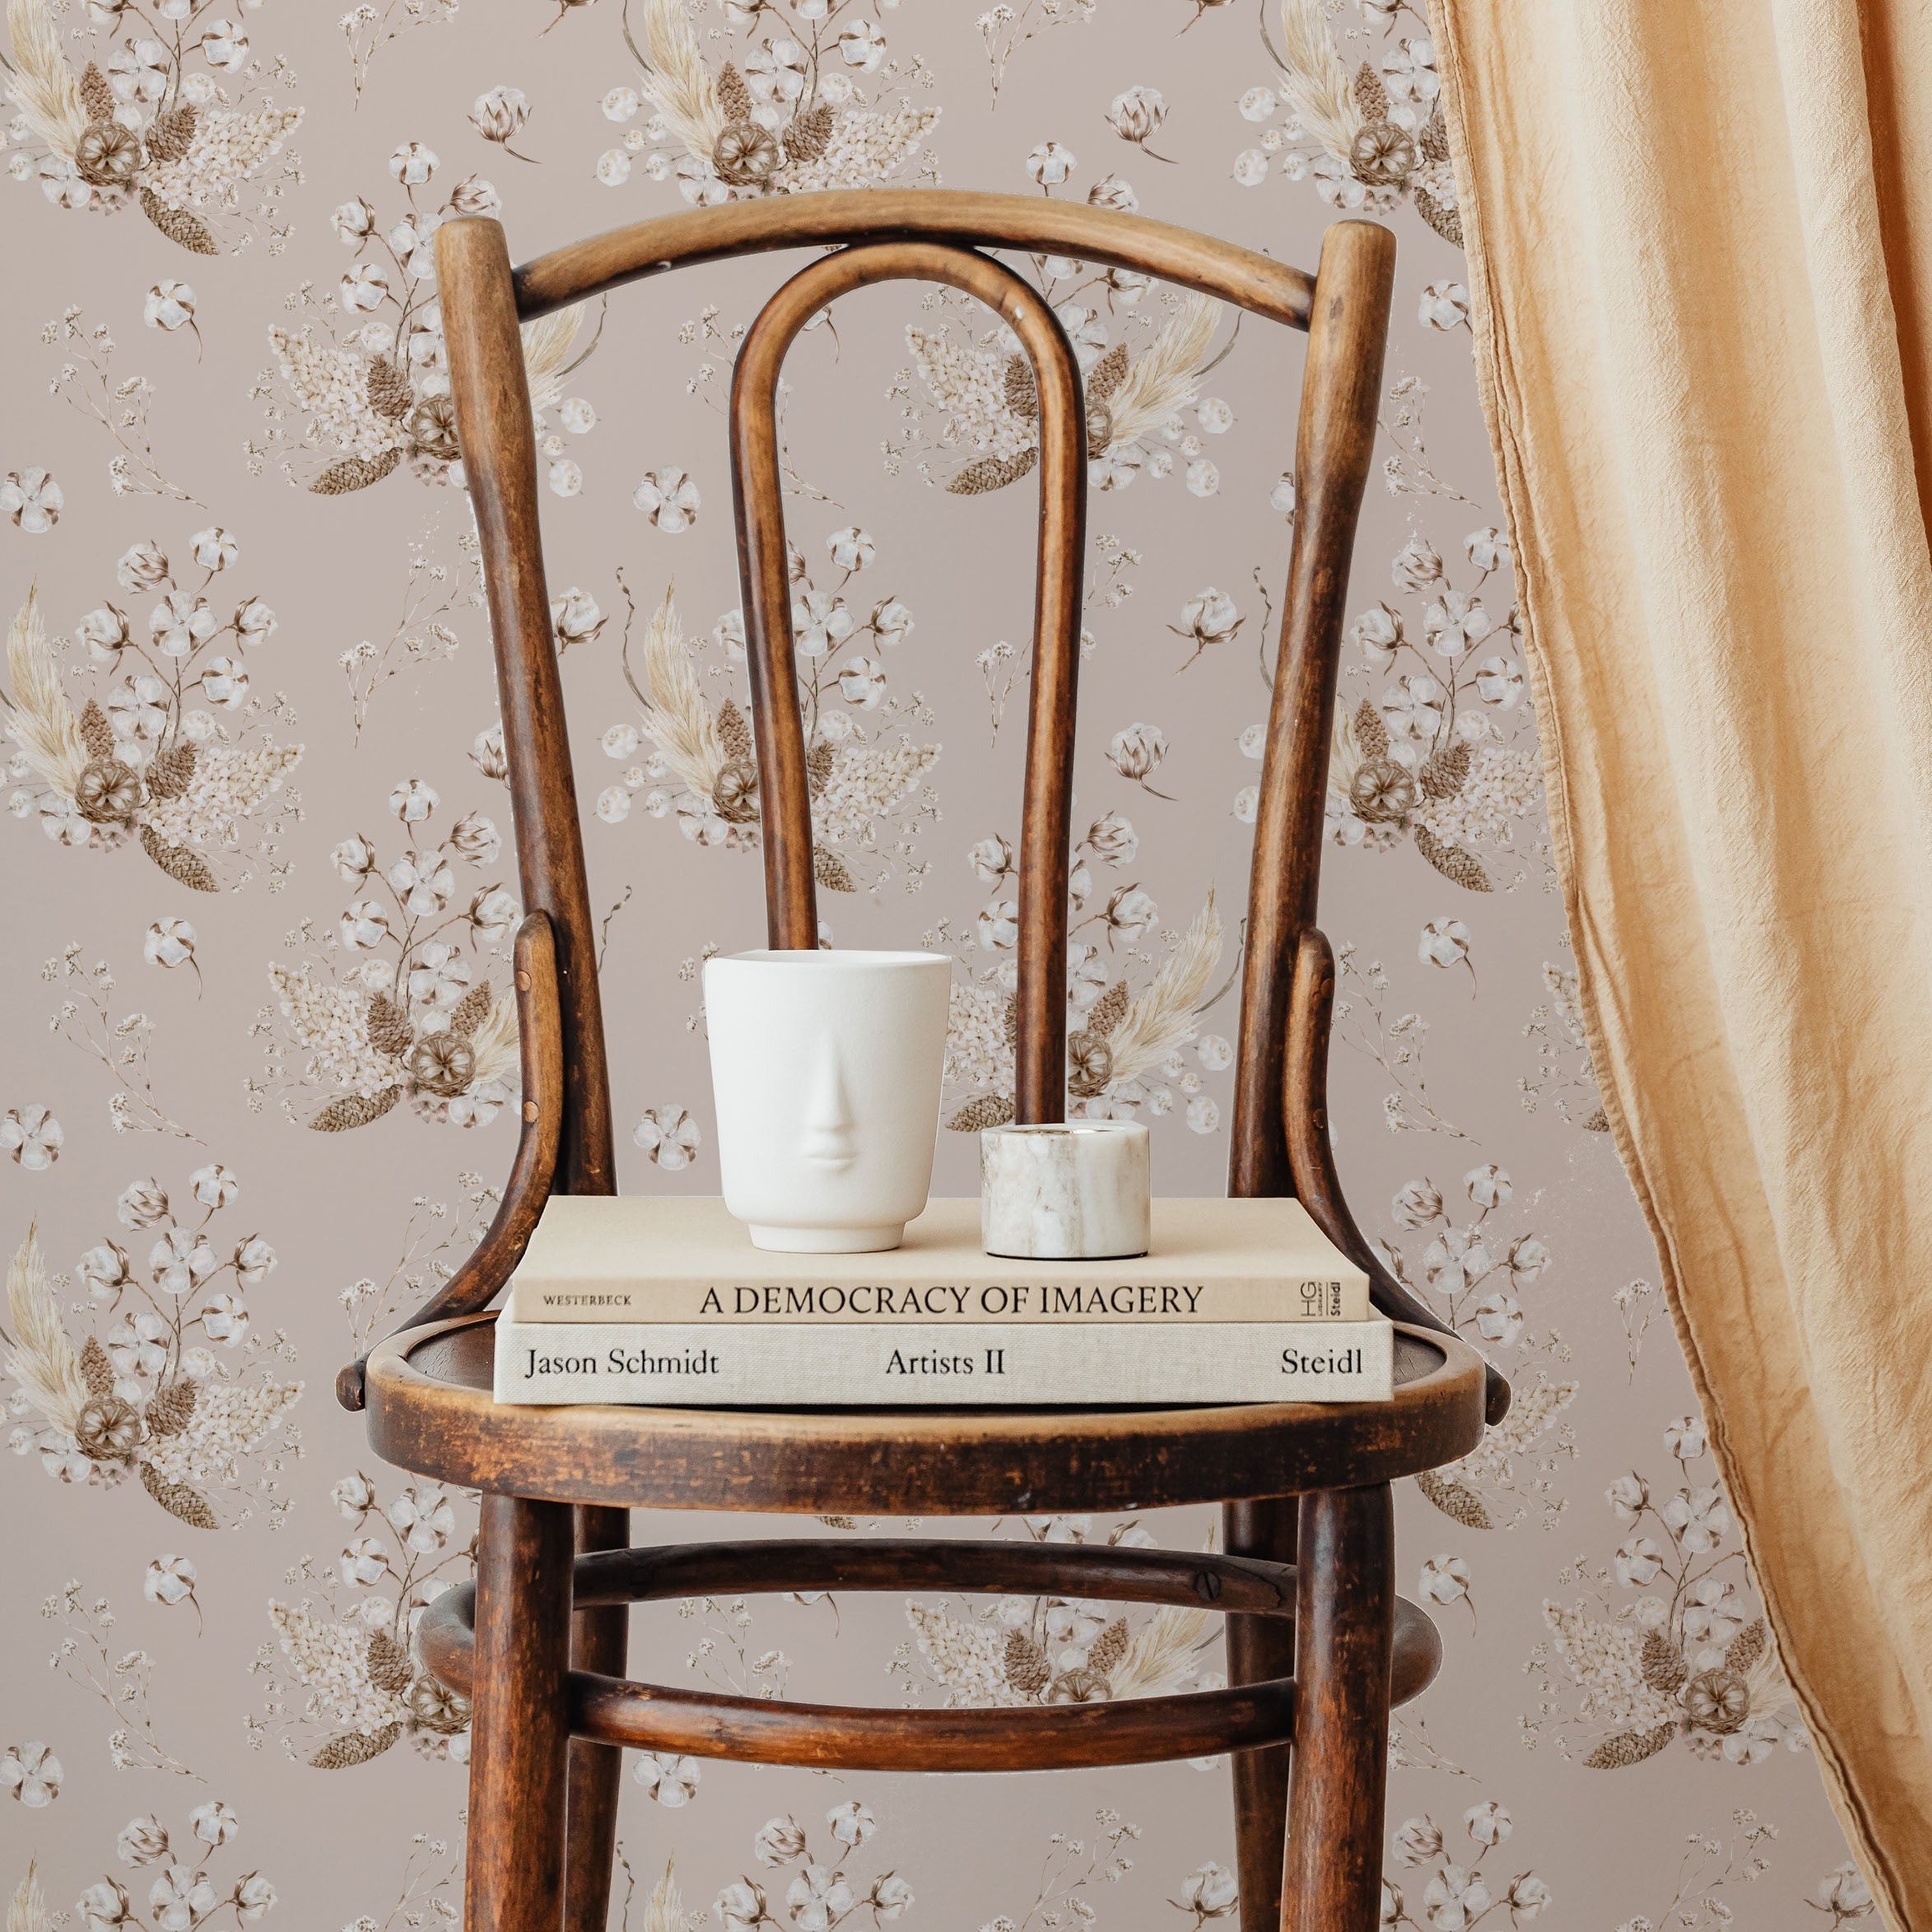 An elegant, vintage wooden chair against a wall covered with 'Boho Bouquet II Wallpaper', featuring clusters of delicate flowers and leaves in soft pinks and golds against a muted pink background. On the chair, a white sculptural face mug and a small marble candle holder sit atop a couple of hardcover books, adding to the room’s bohemian chic aesthetic.